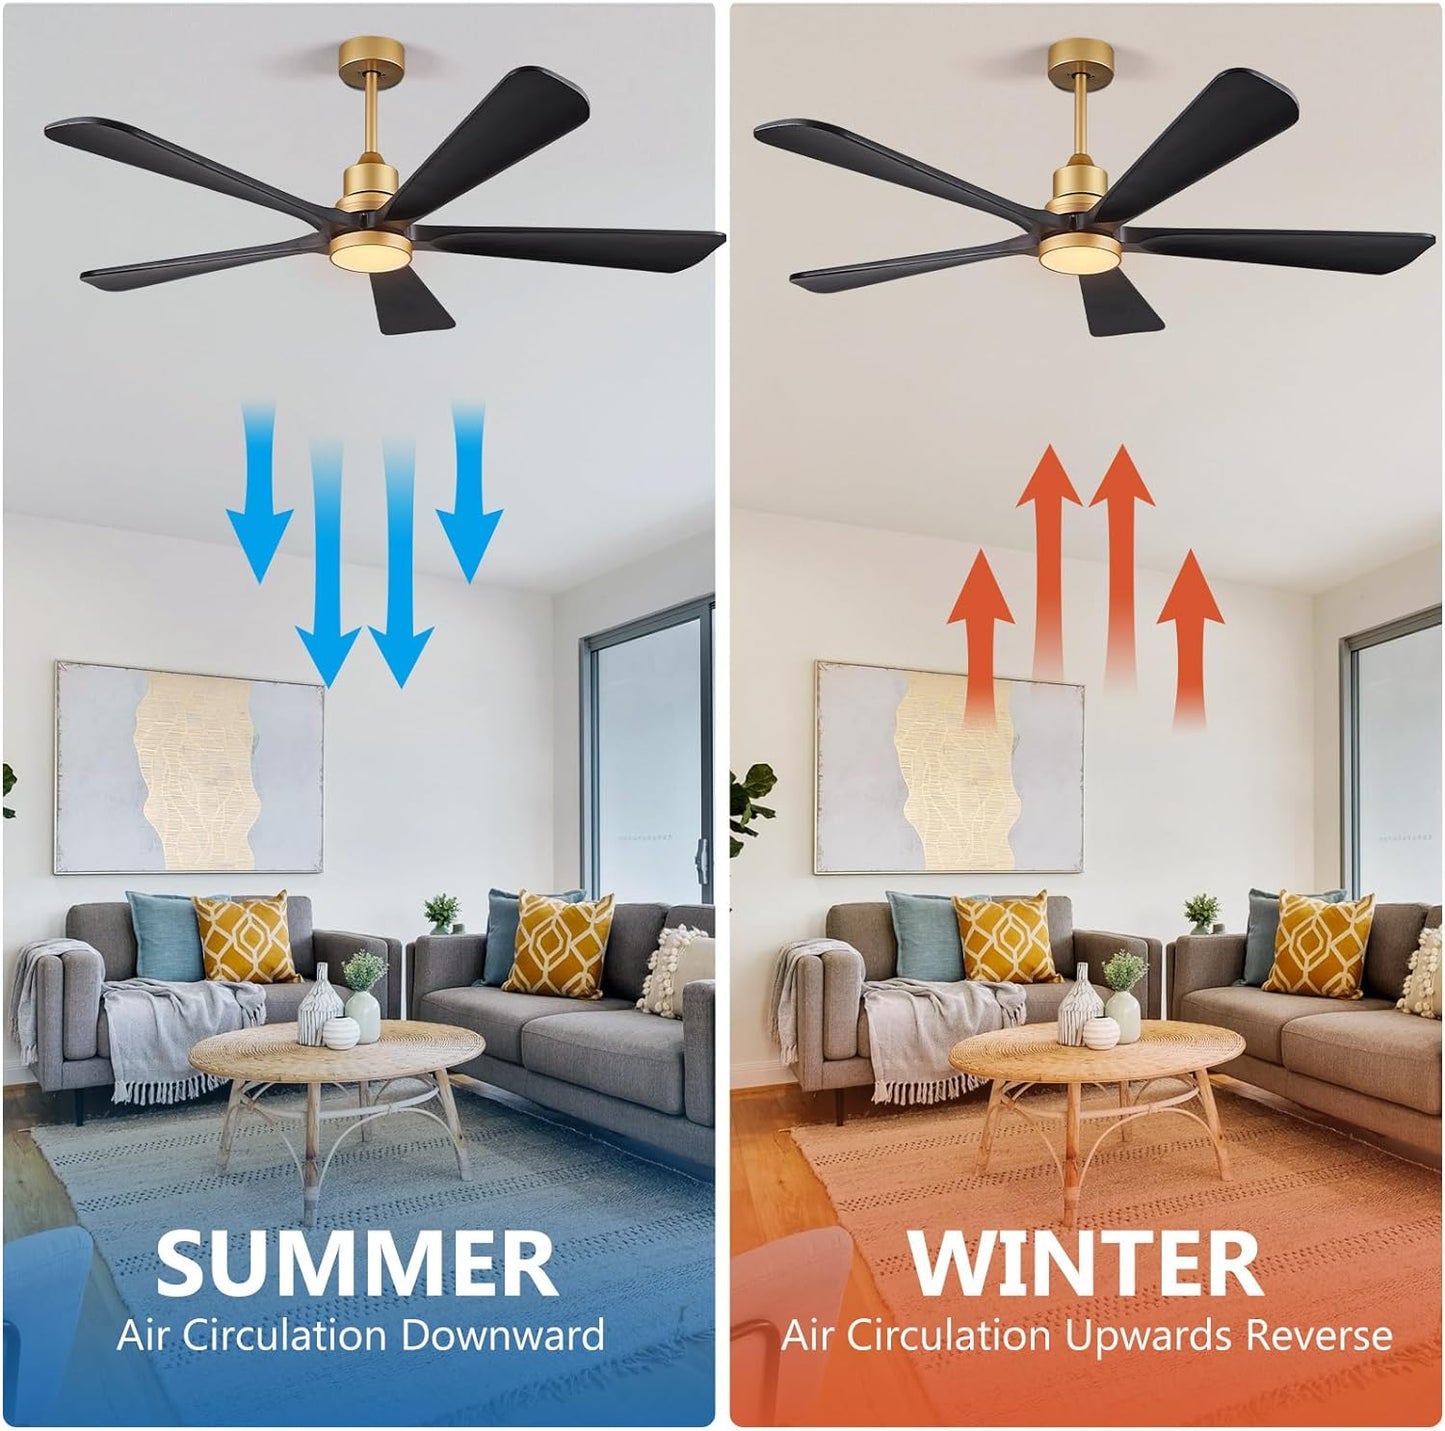 Ceiling Fans with Lights Remote Control - 52 inch Modern Ceiling Fan with Light 5 Black Wood Blades, Reversible Motor for Indoor/Outdoor Patio, Bedroom, Living Room, Farmhouse (52 INCH, Black)